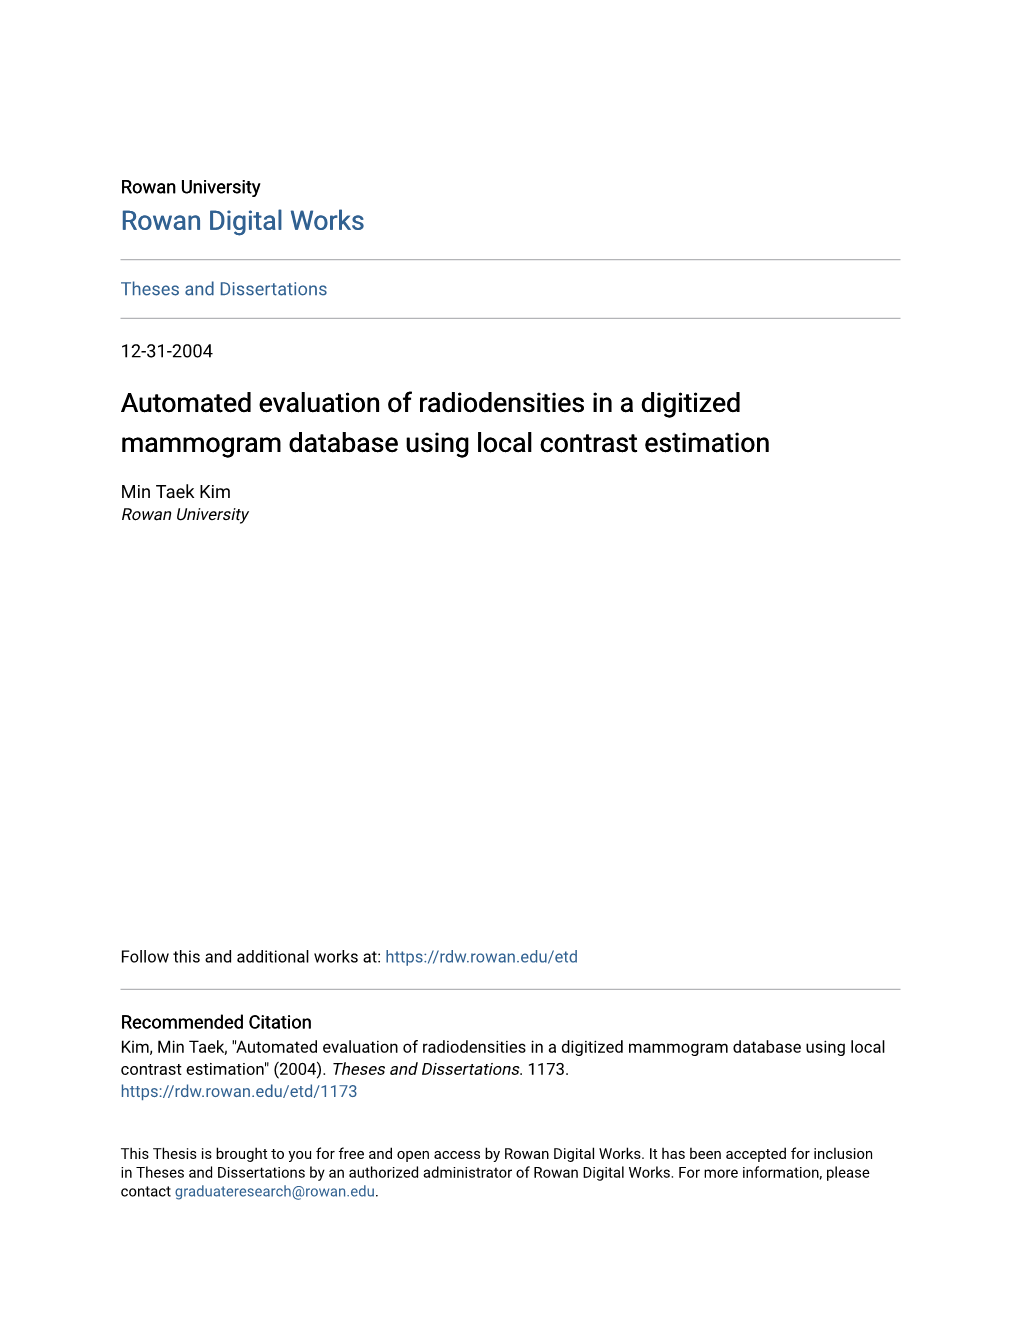 Automated Evaluation of Radiodensities in a Digitized Mammogram Database Using Local Contrast Estimation